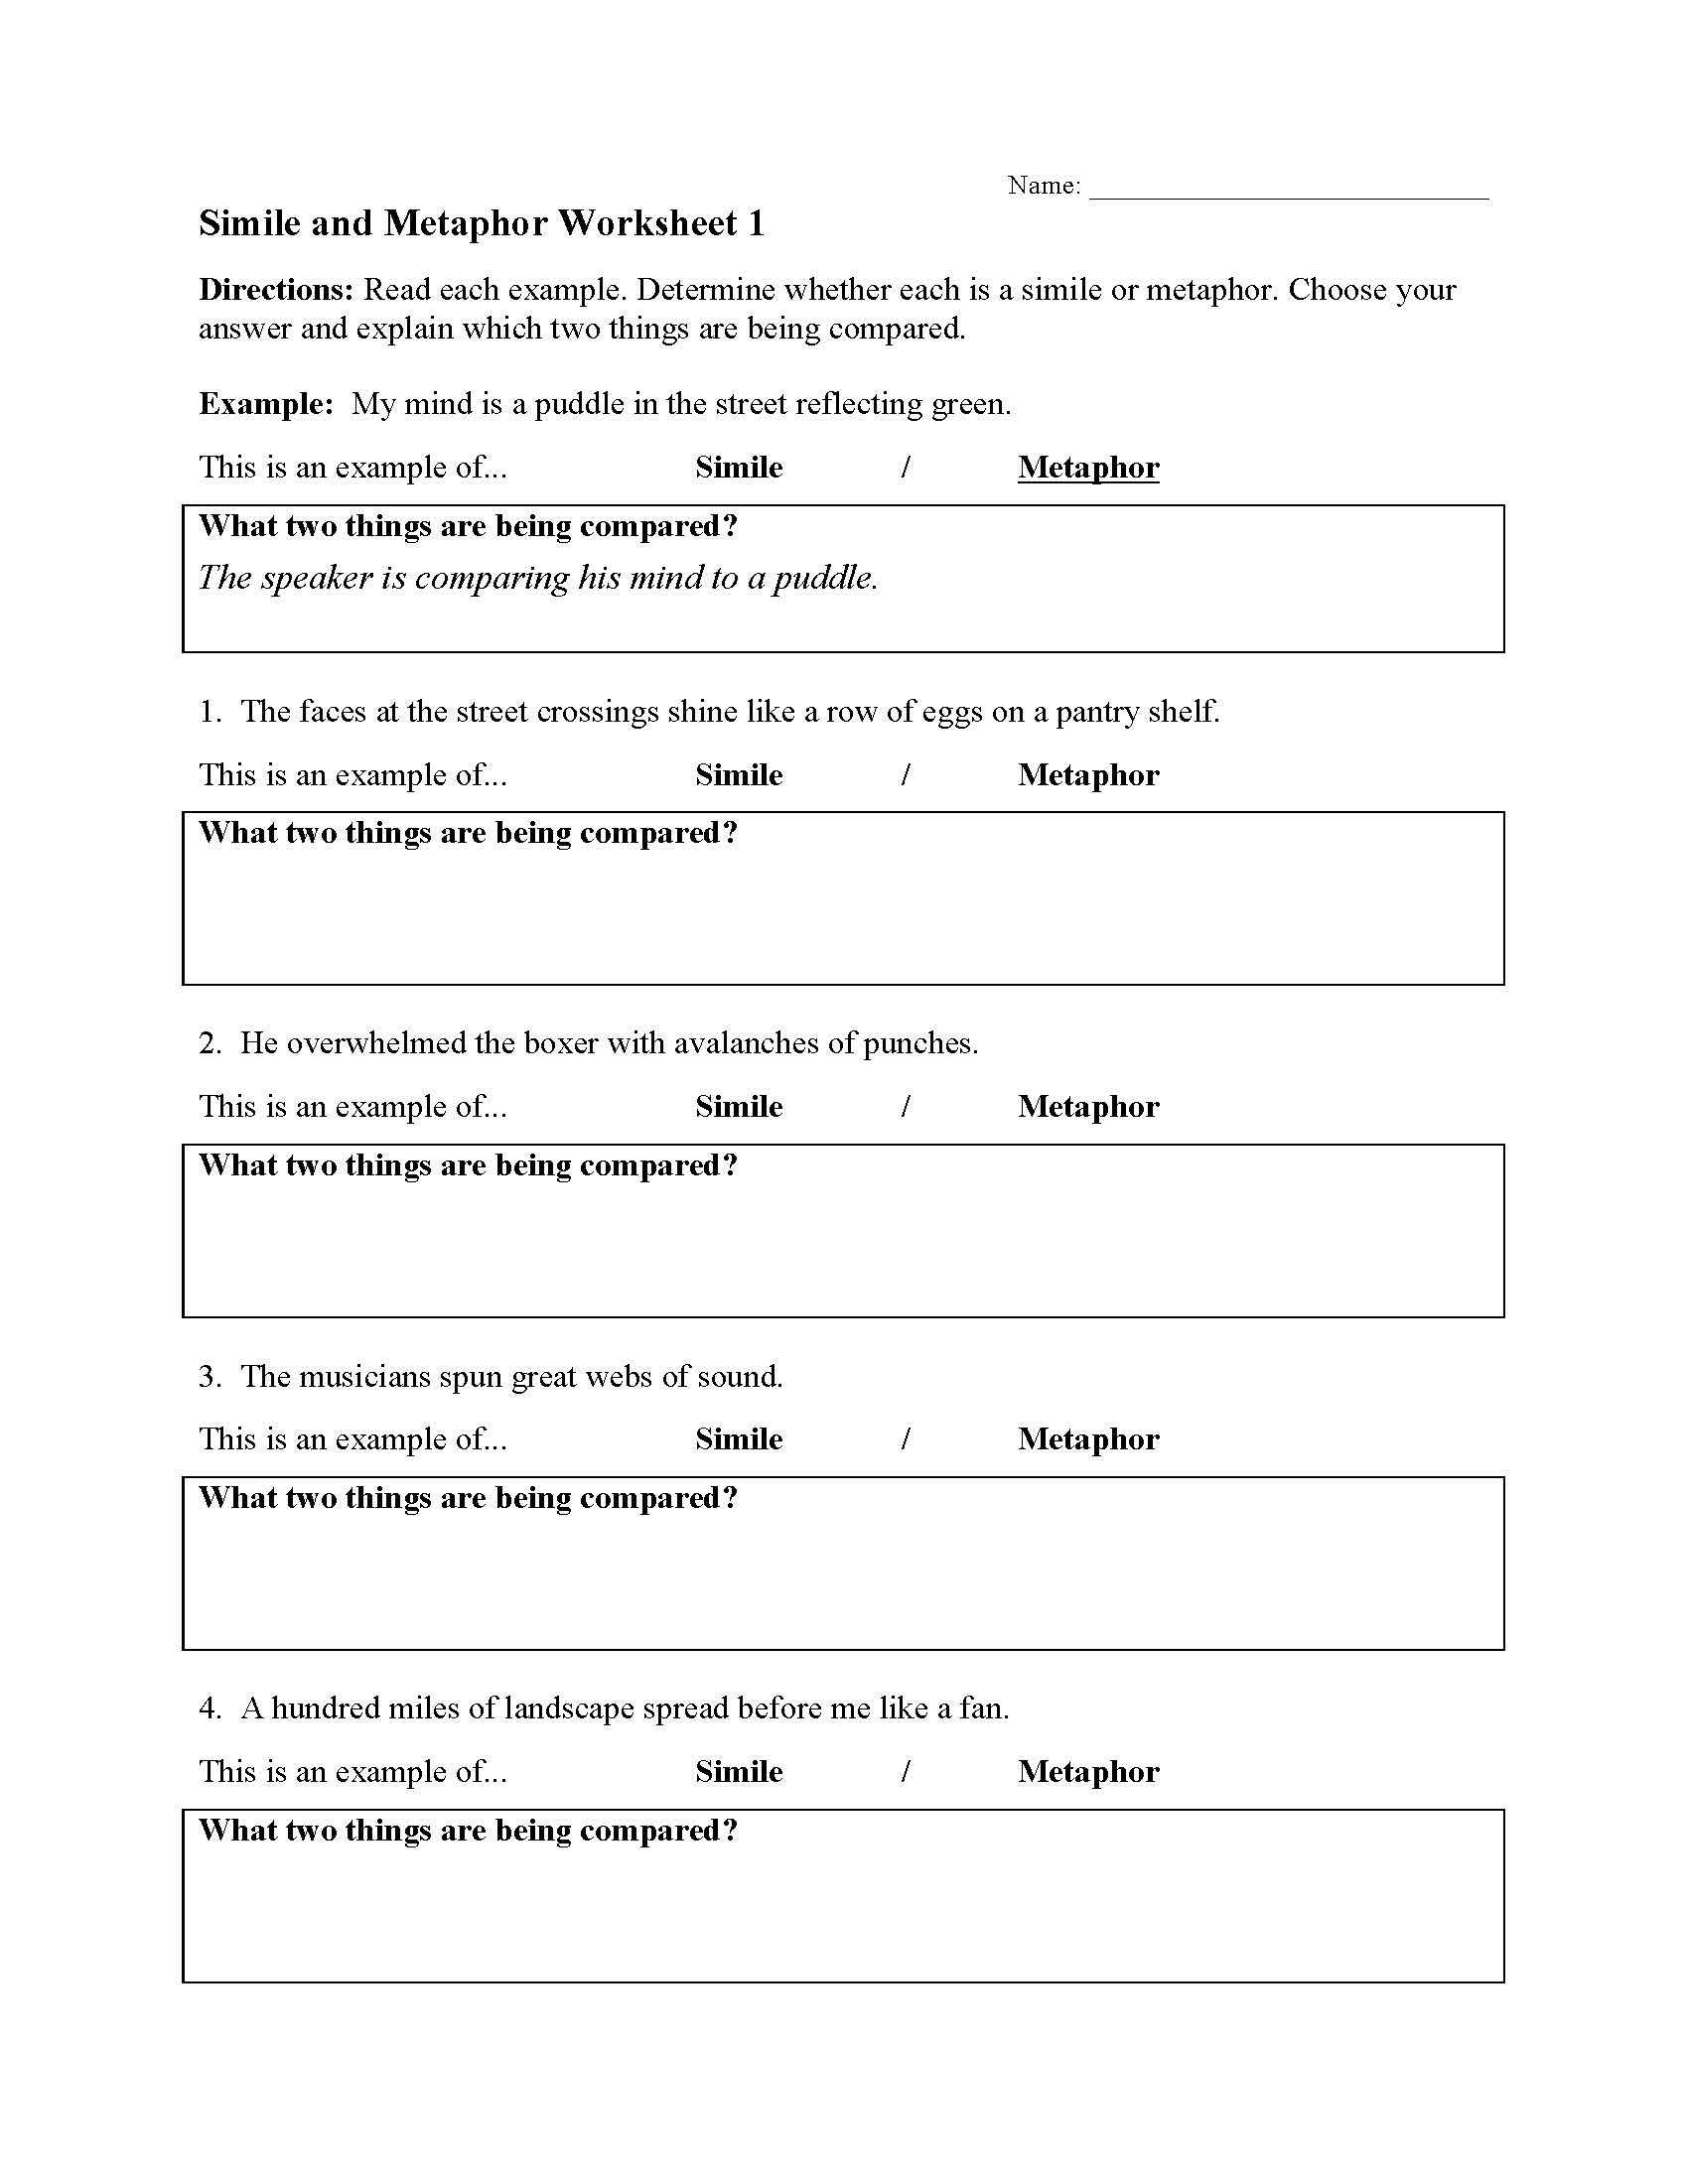 Simile and Metaphor Worksheets  Ereading Worksheets Regarding Simile And Metaphor Worksheet